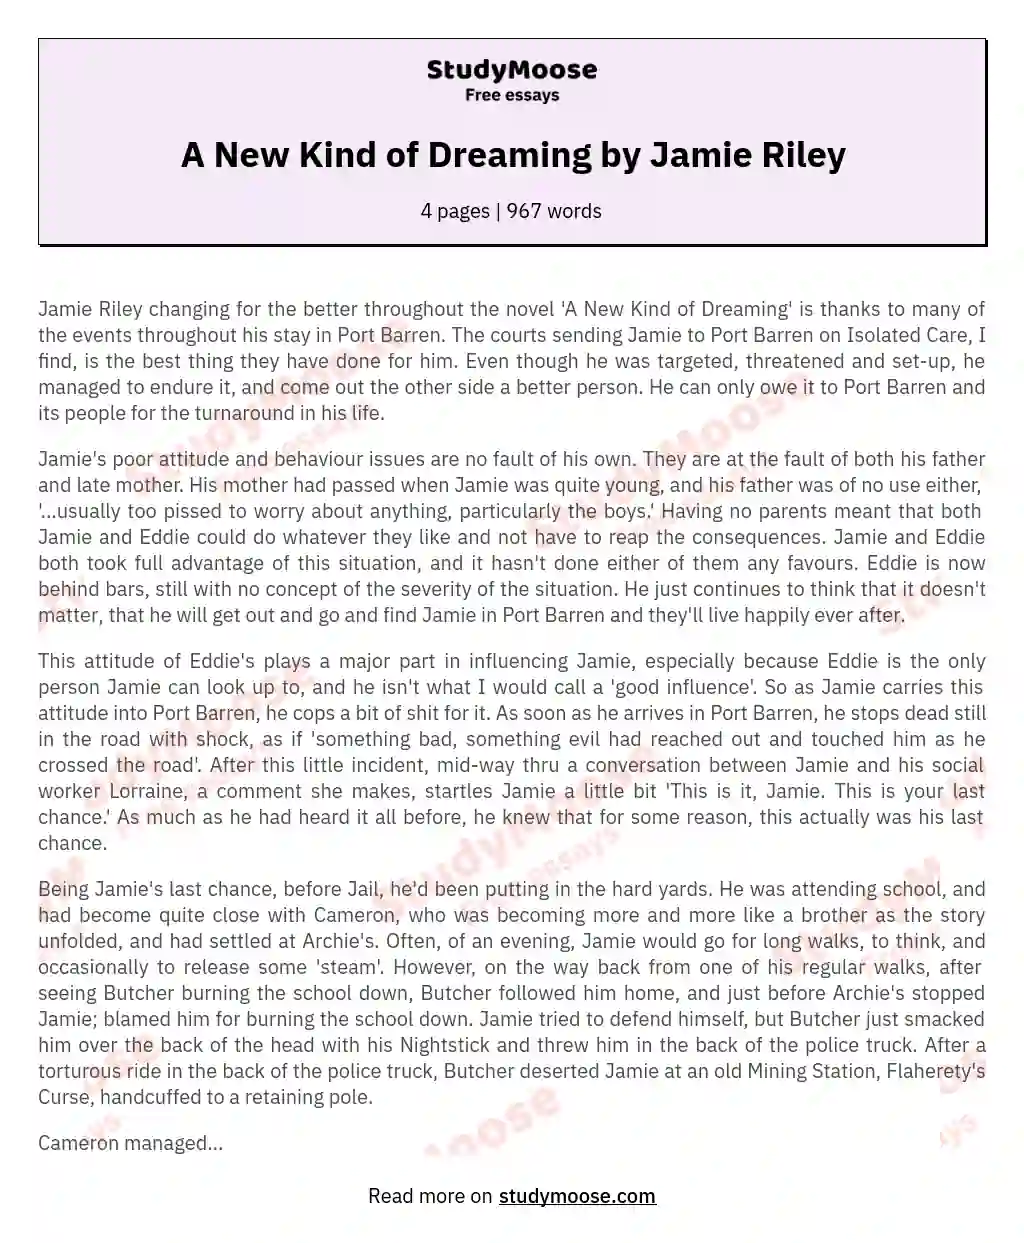 A New Kind of Dreaming by Jamie Riley essay